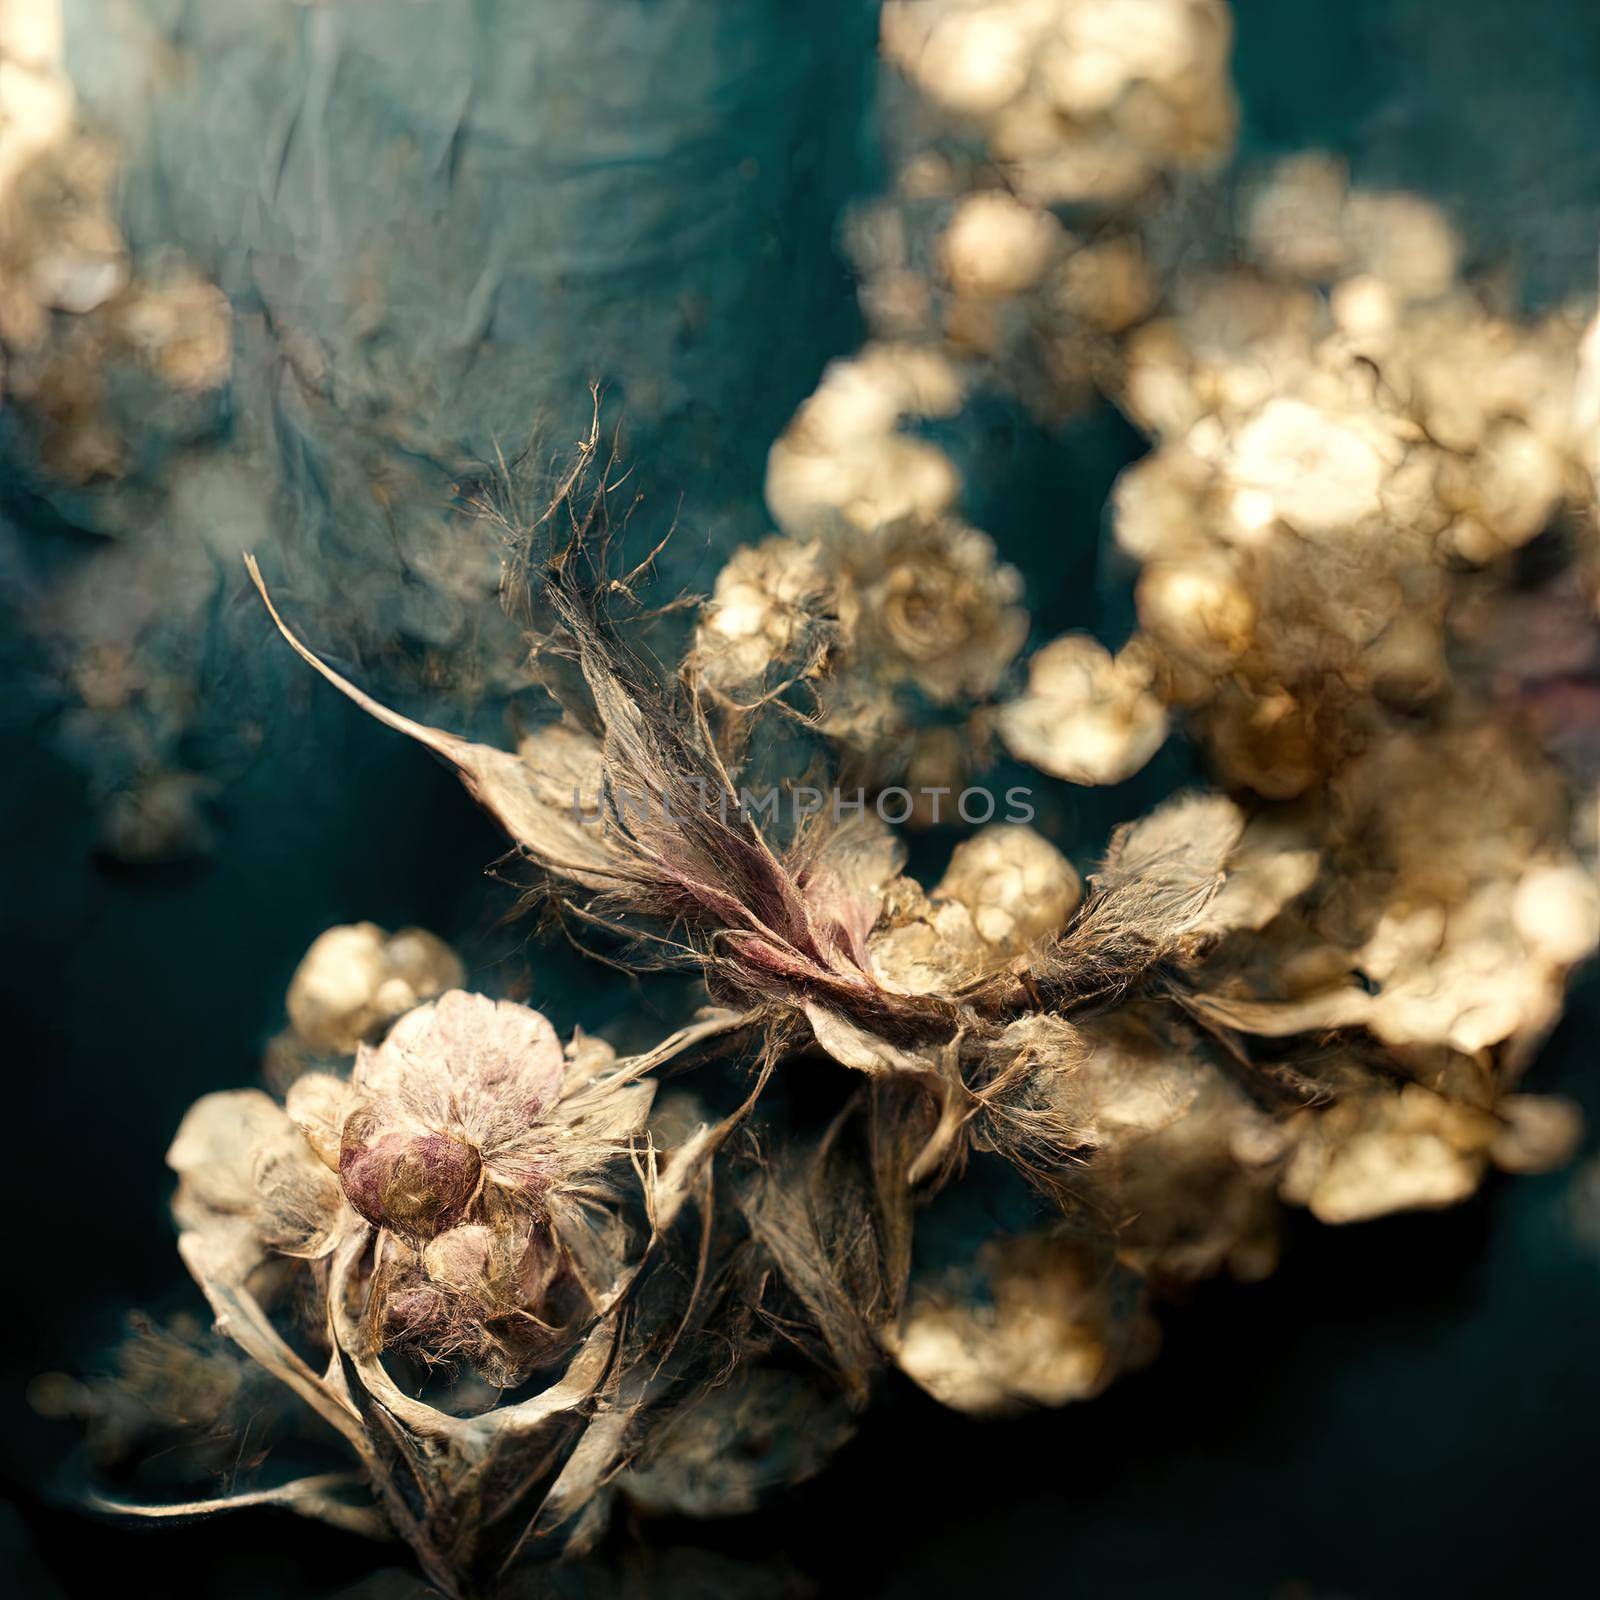 Abstract metallic bouquet in grungy textures with cinematic lighting by 2ragon